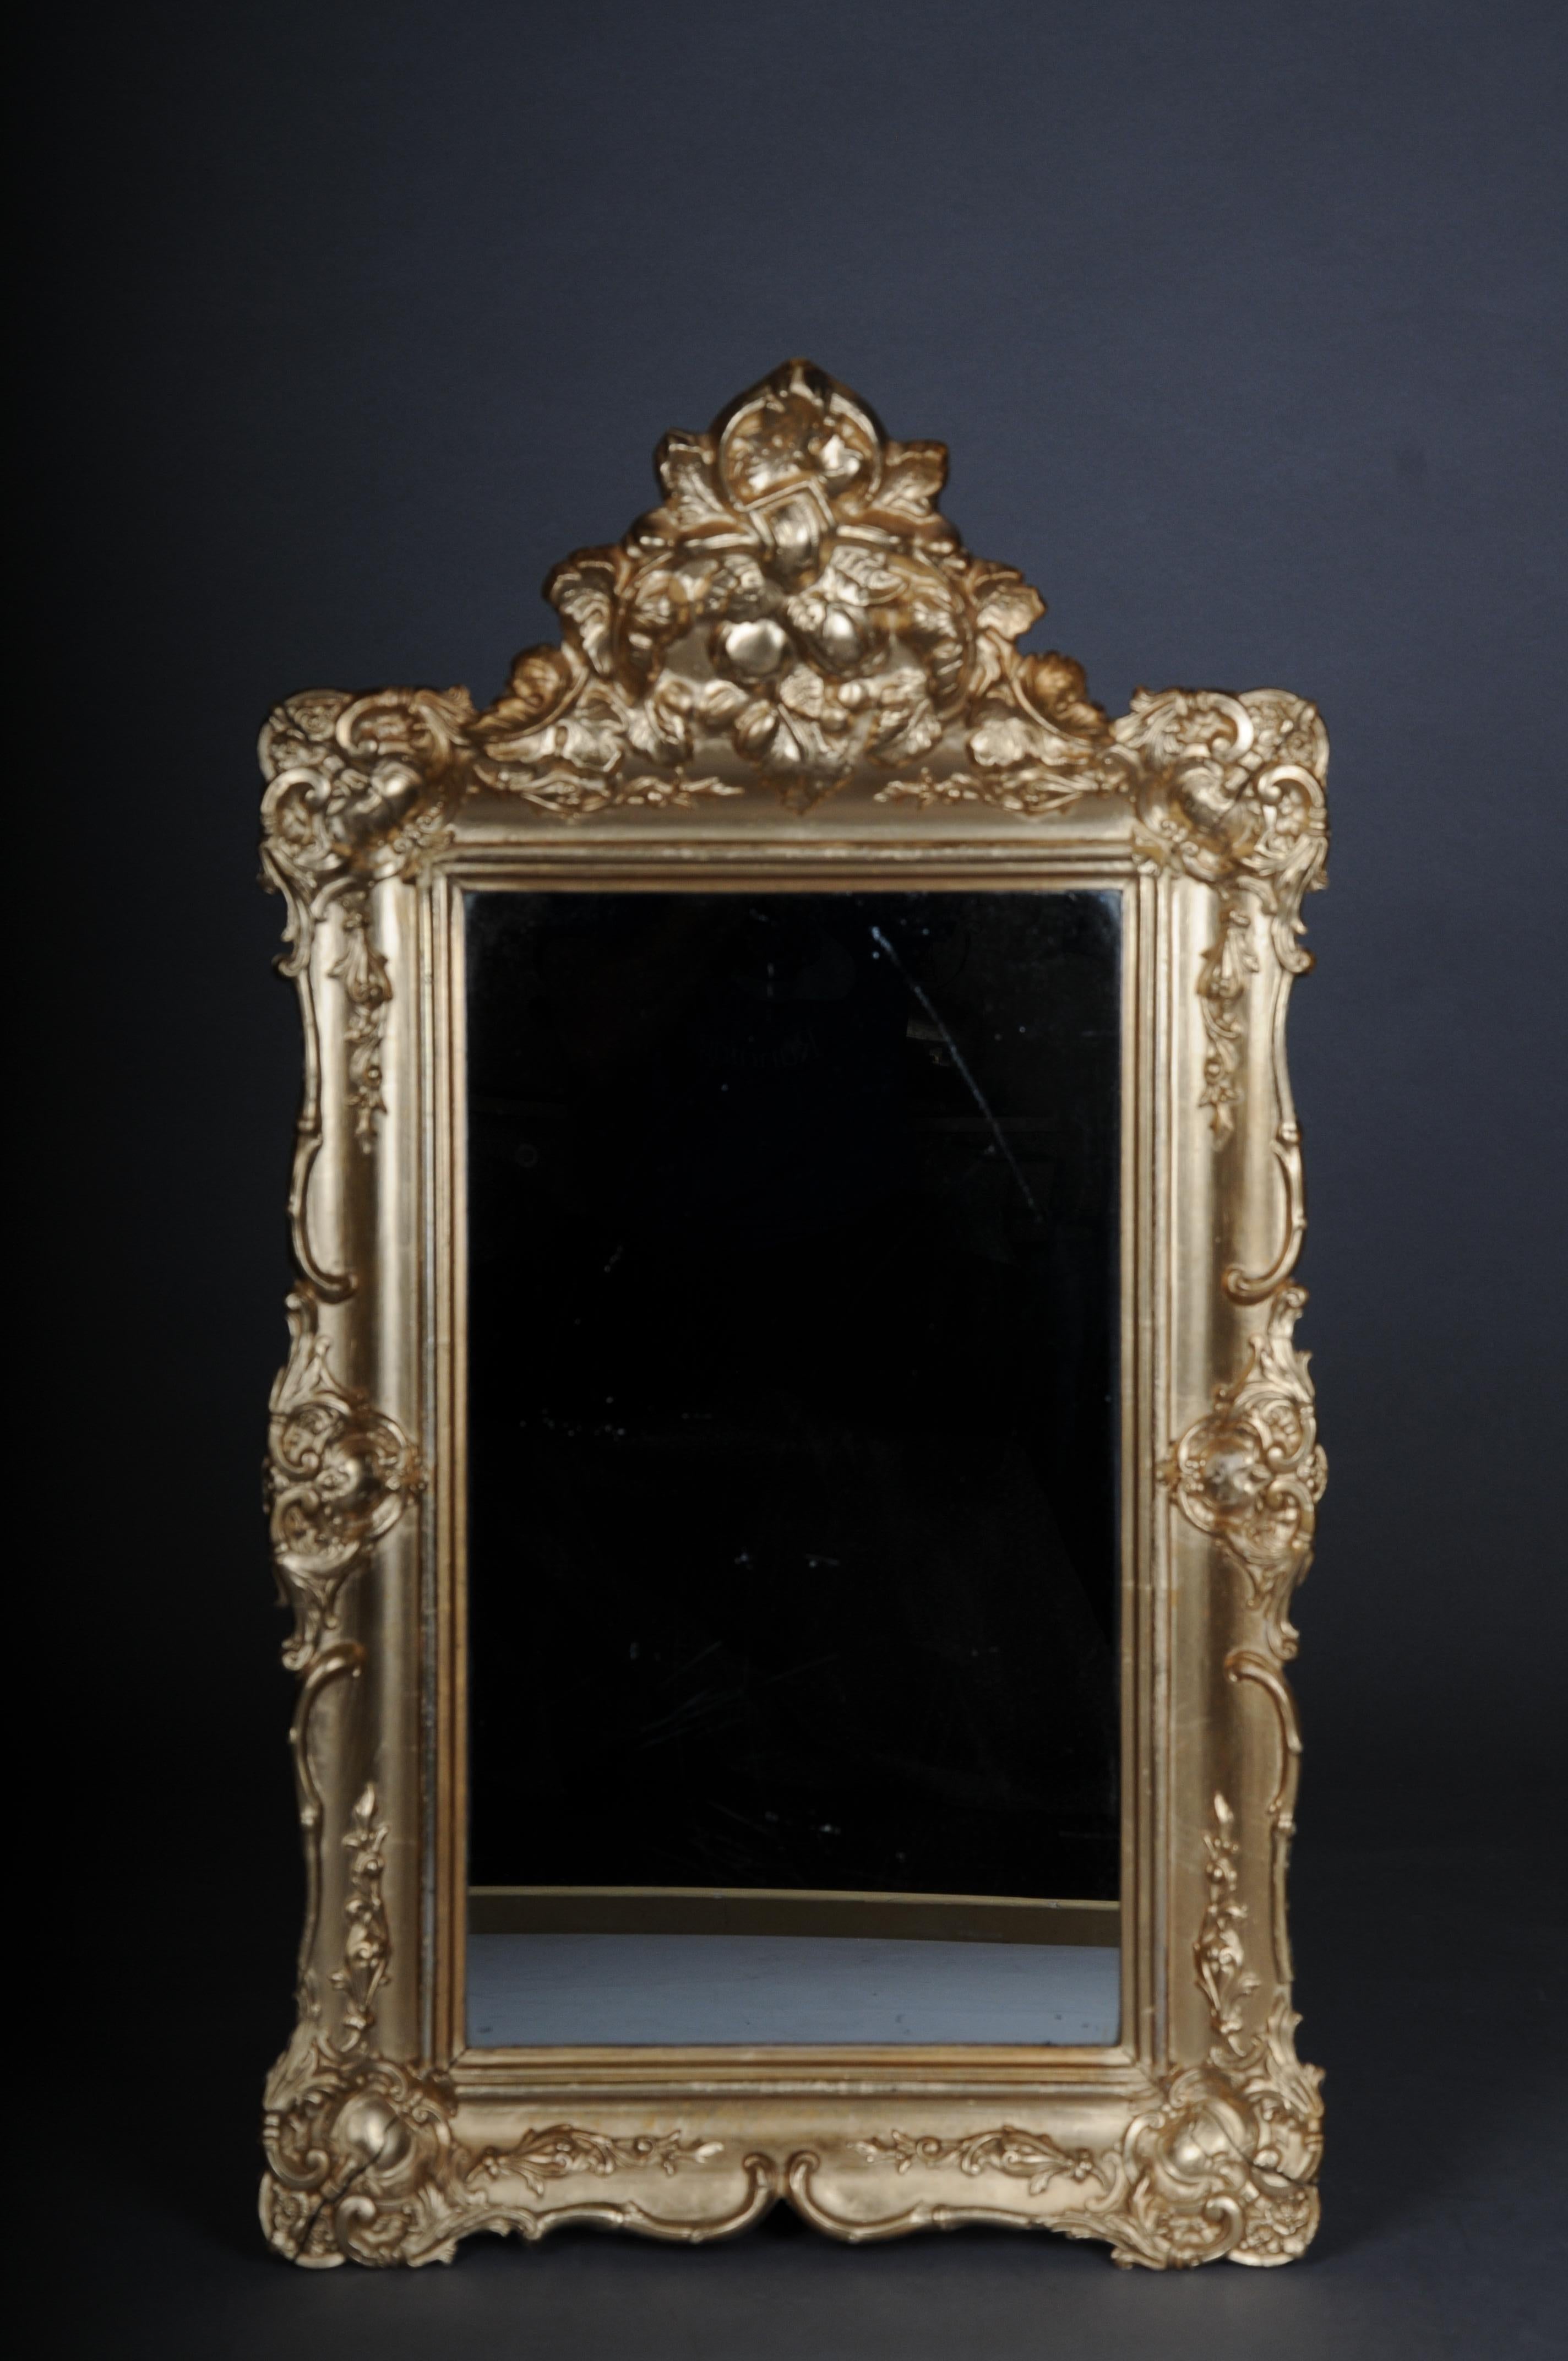 Antique gilded wall mirror, Germany around 1870

Rectangular gold frame with high lavish crowning. Ornate frame.
Germany around 1870